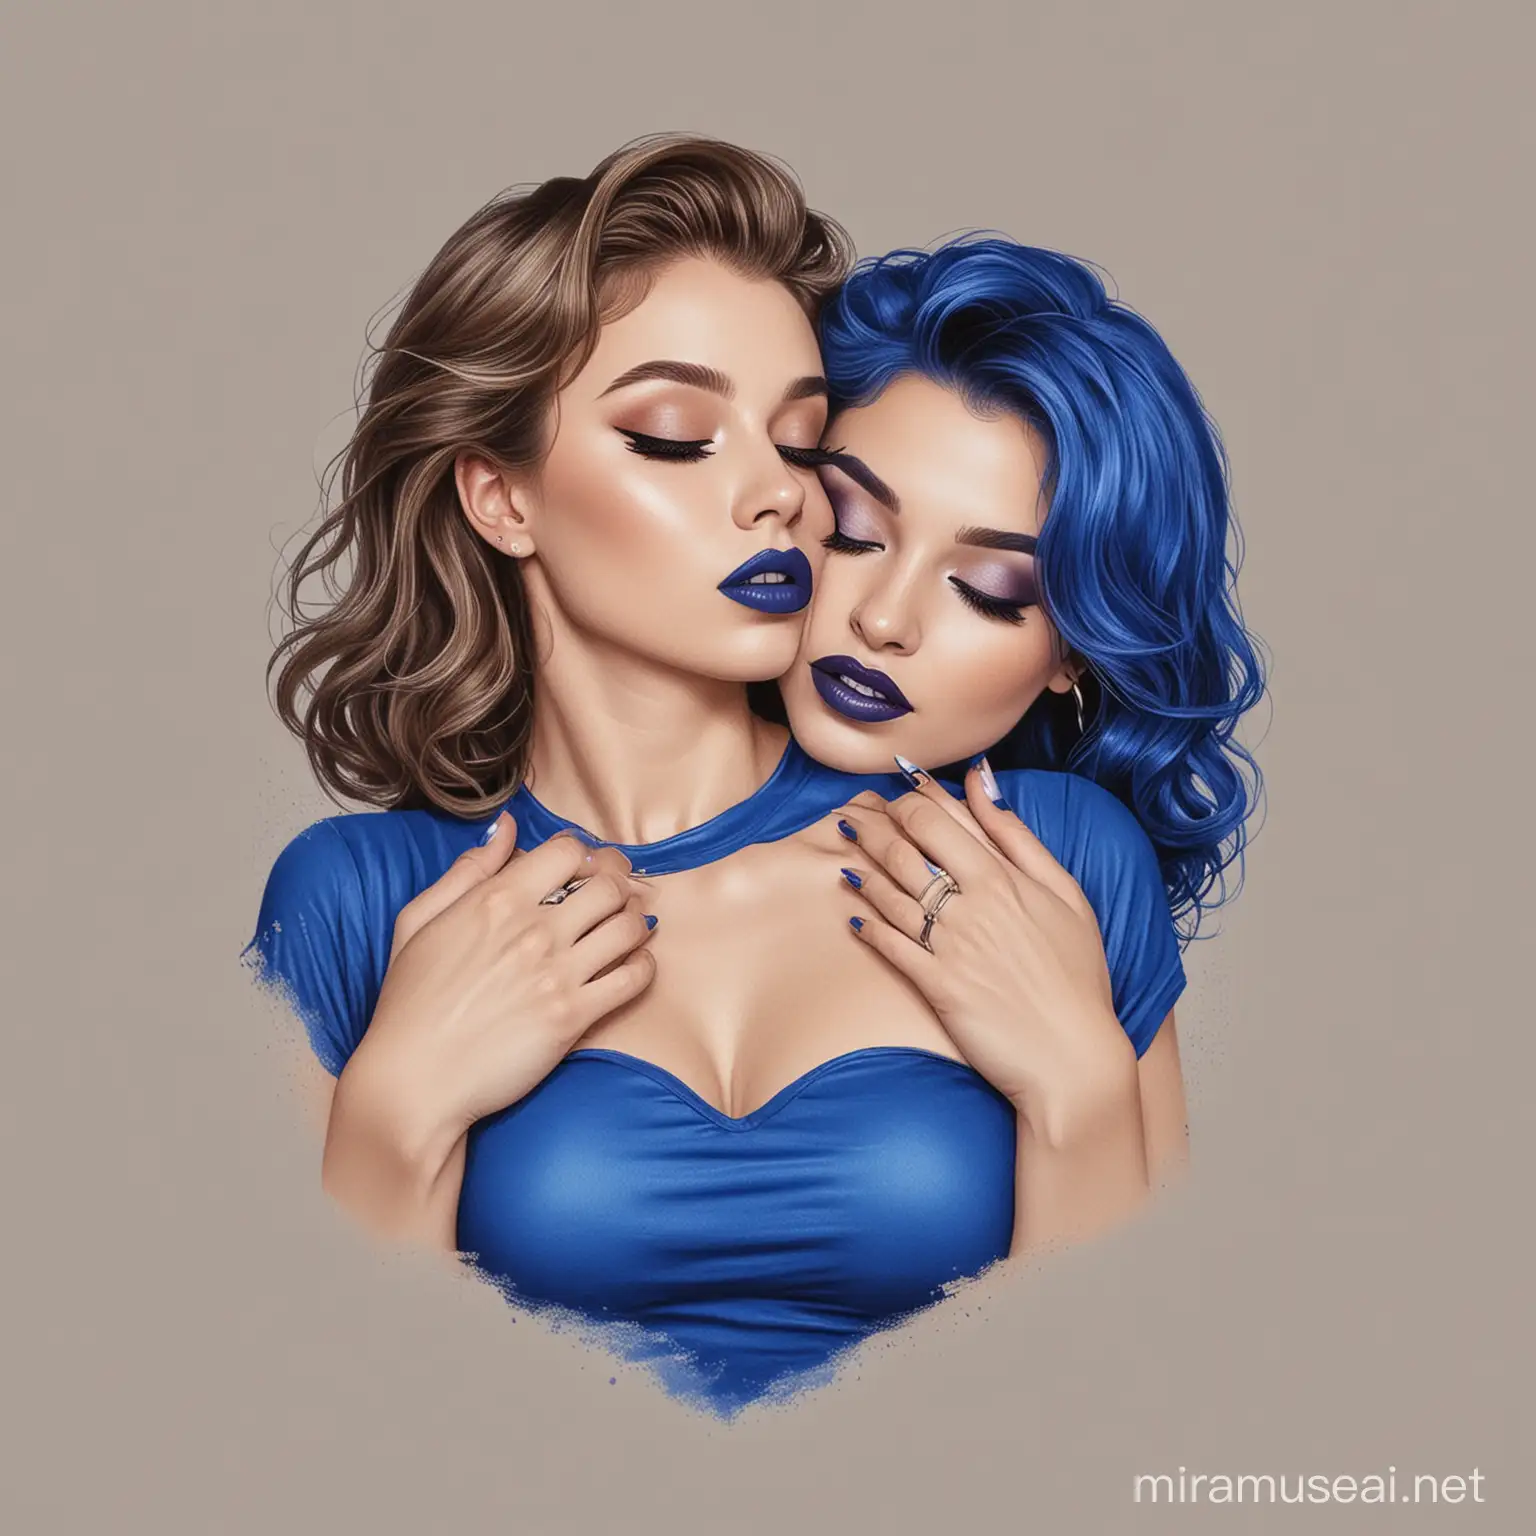 Lesbian Couple Embracing in Royal Blue Apparel and Makeup